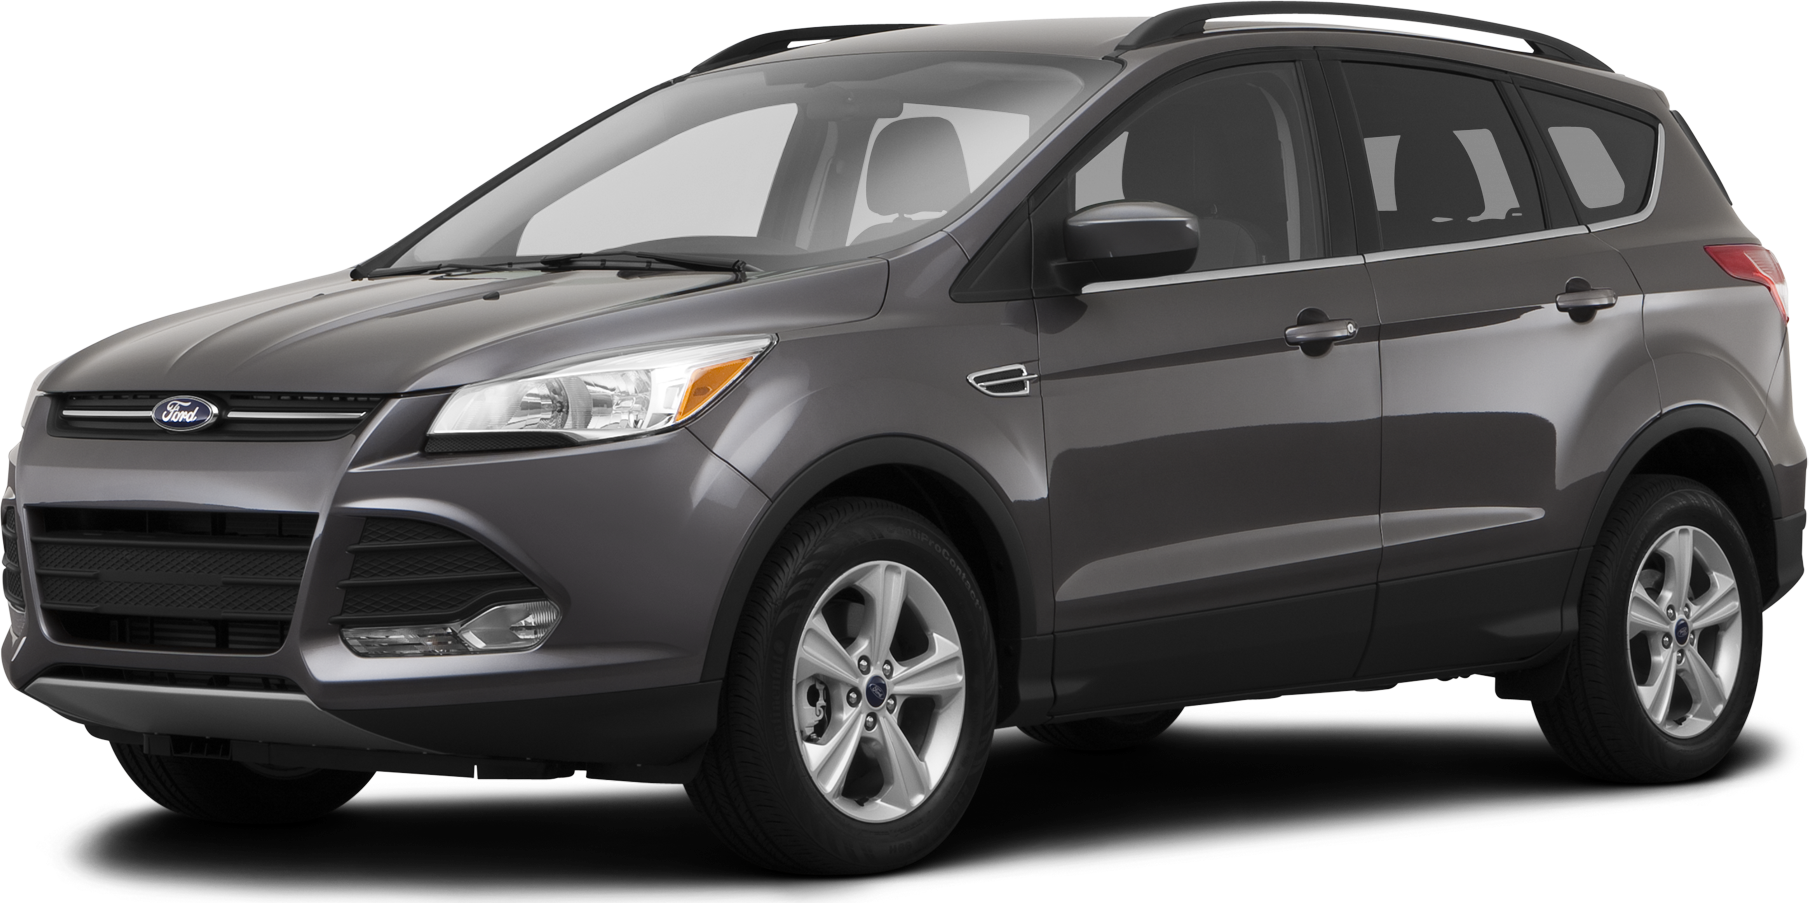 2014 Ford Escape Values & Cars for Sale | Kelley Blue Book